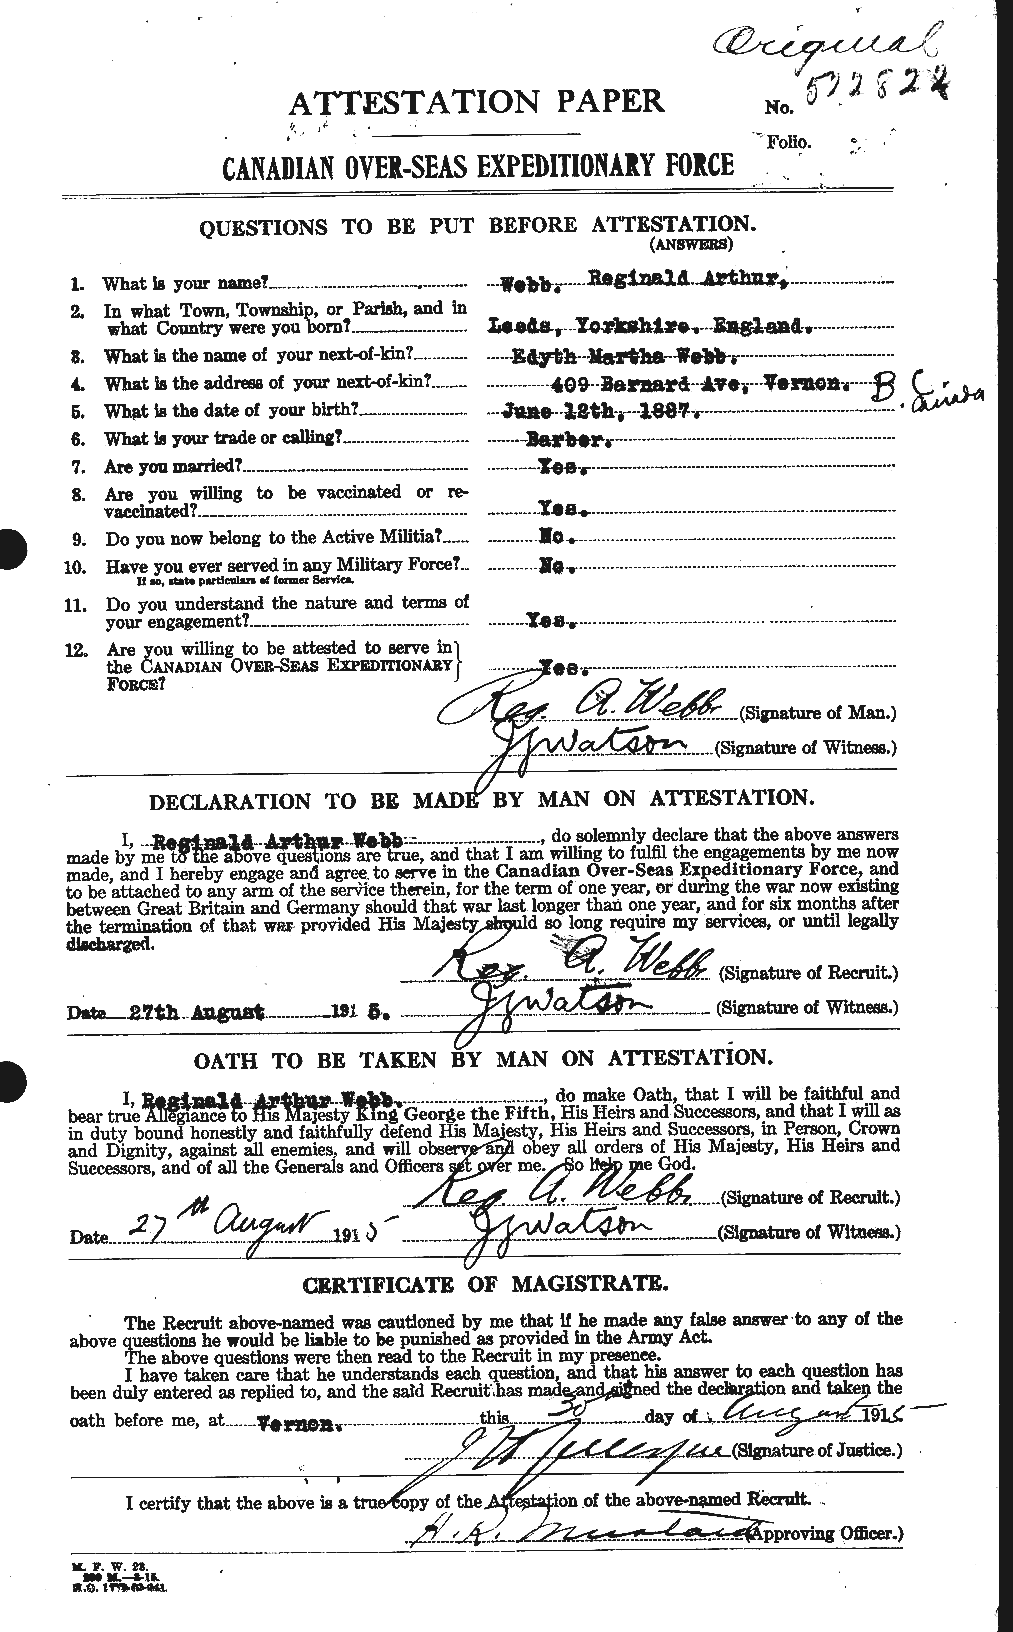 Personnel Records of the First World War - CEF 663202a